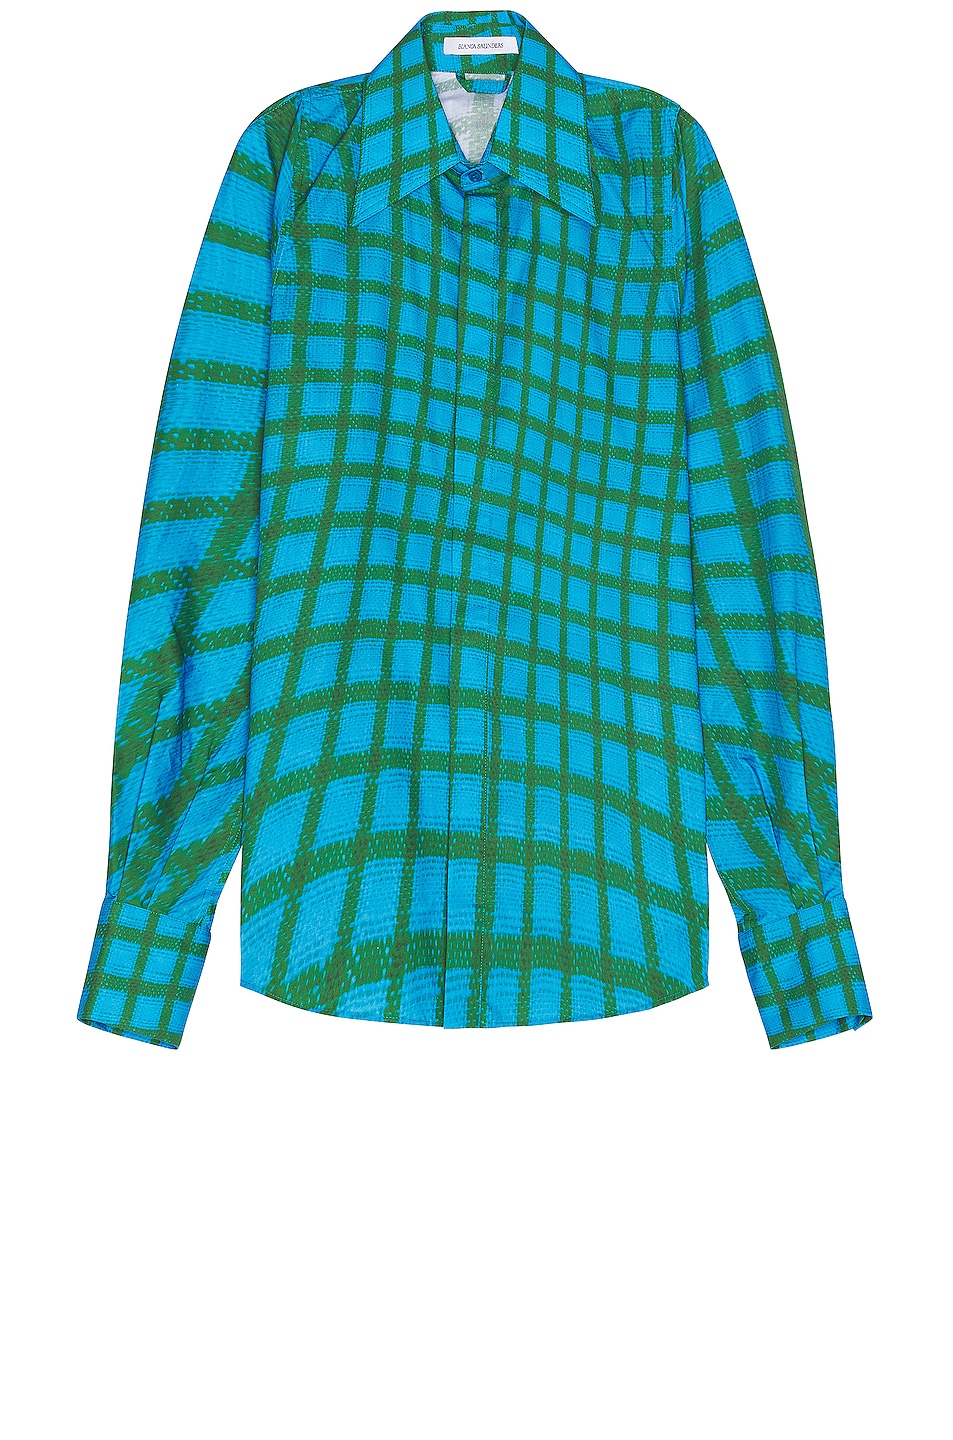 Image 1 of Bianca Saunders Lamont Button Down in Blue & Green Grid Print